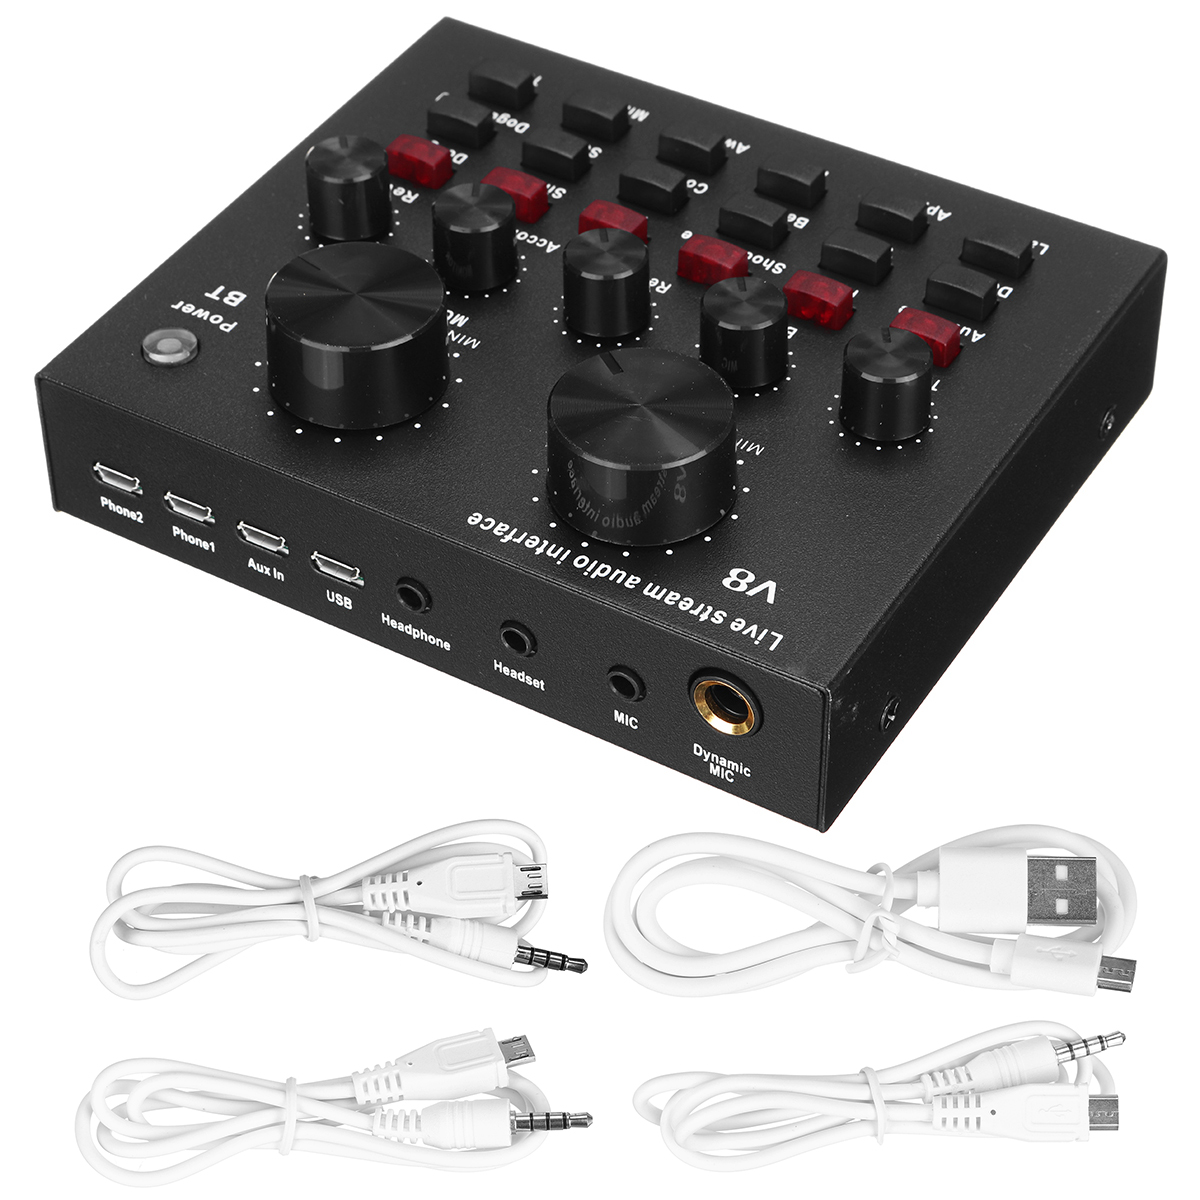 V8 Audio Mixer Sound Card USB Headset Microphone Webcast Live Sound Card for Phone Computer Laptop